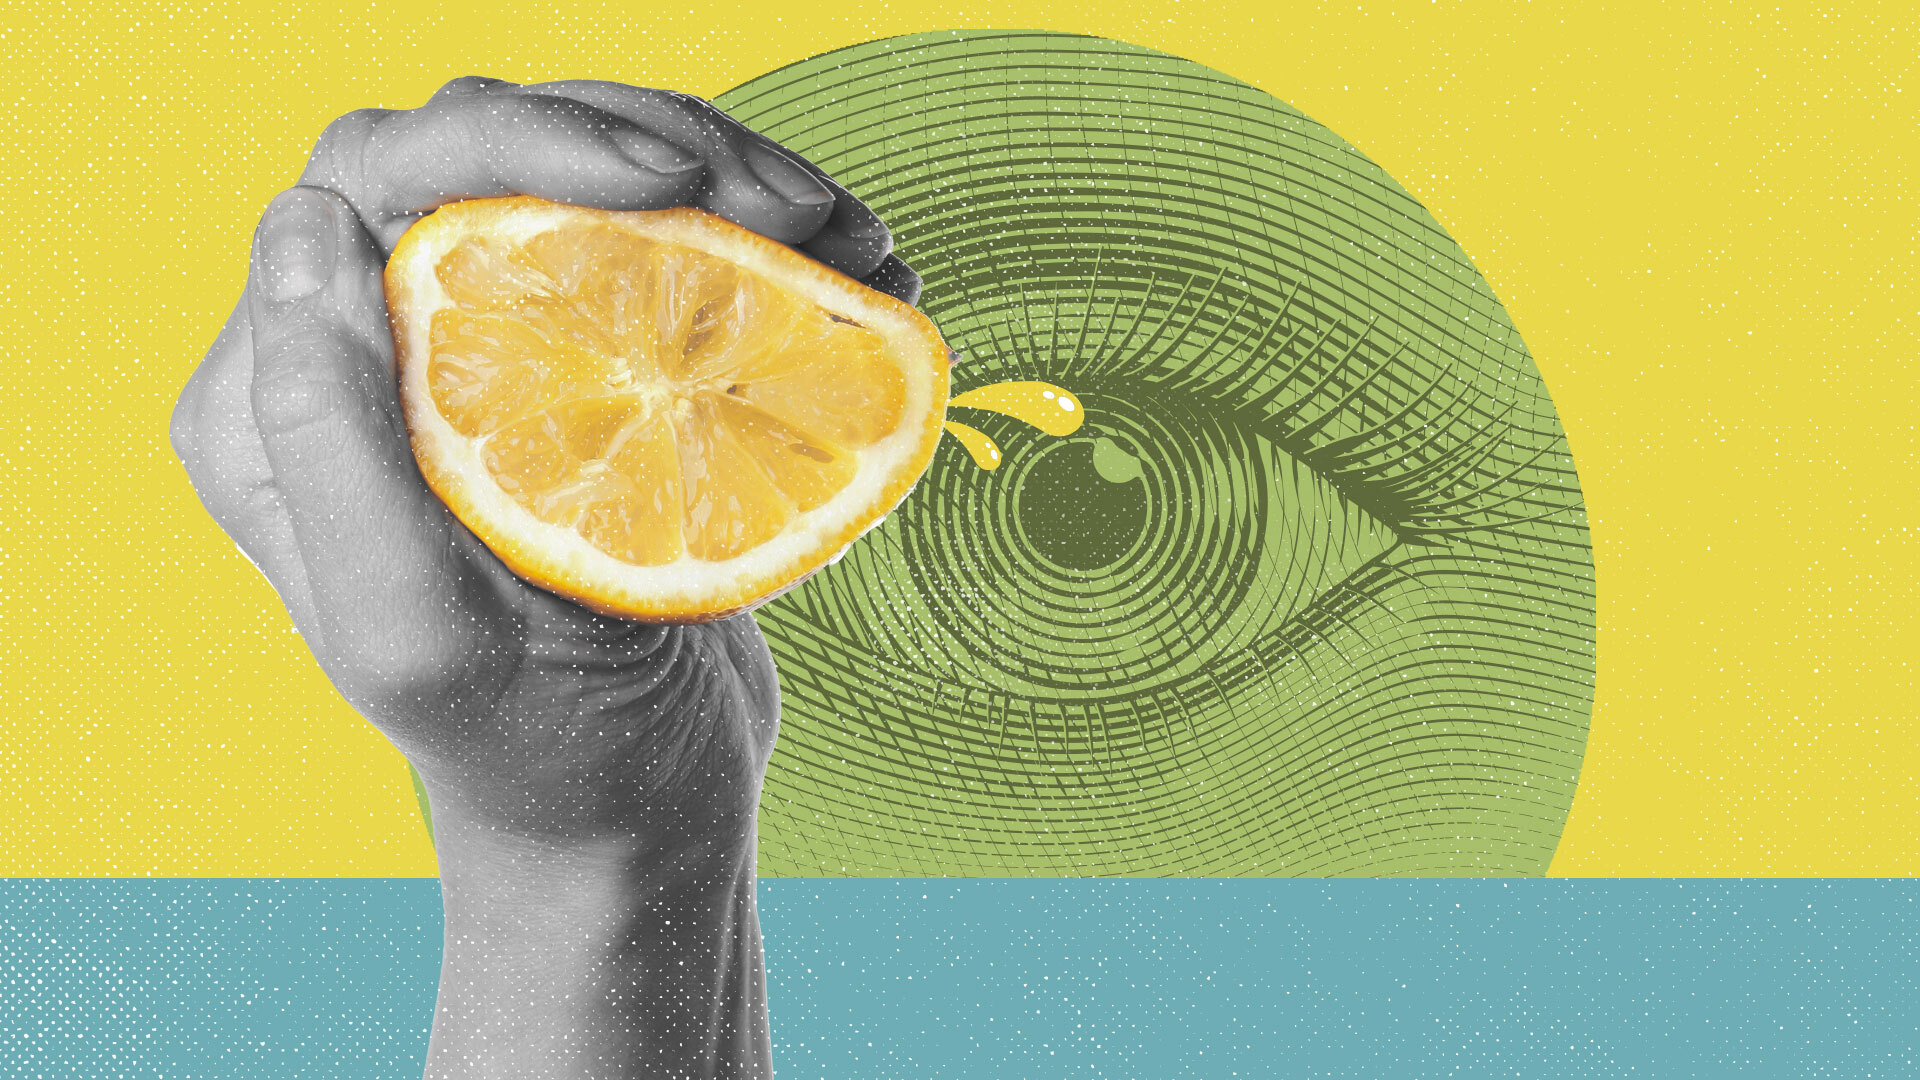 An illustration of a hand squeezing a citrus fruit in front of an illustration of an eye